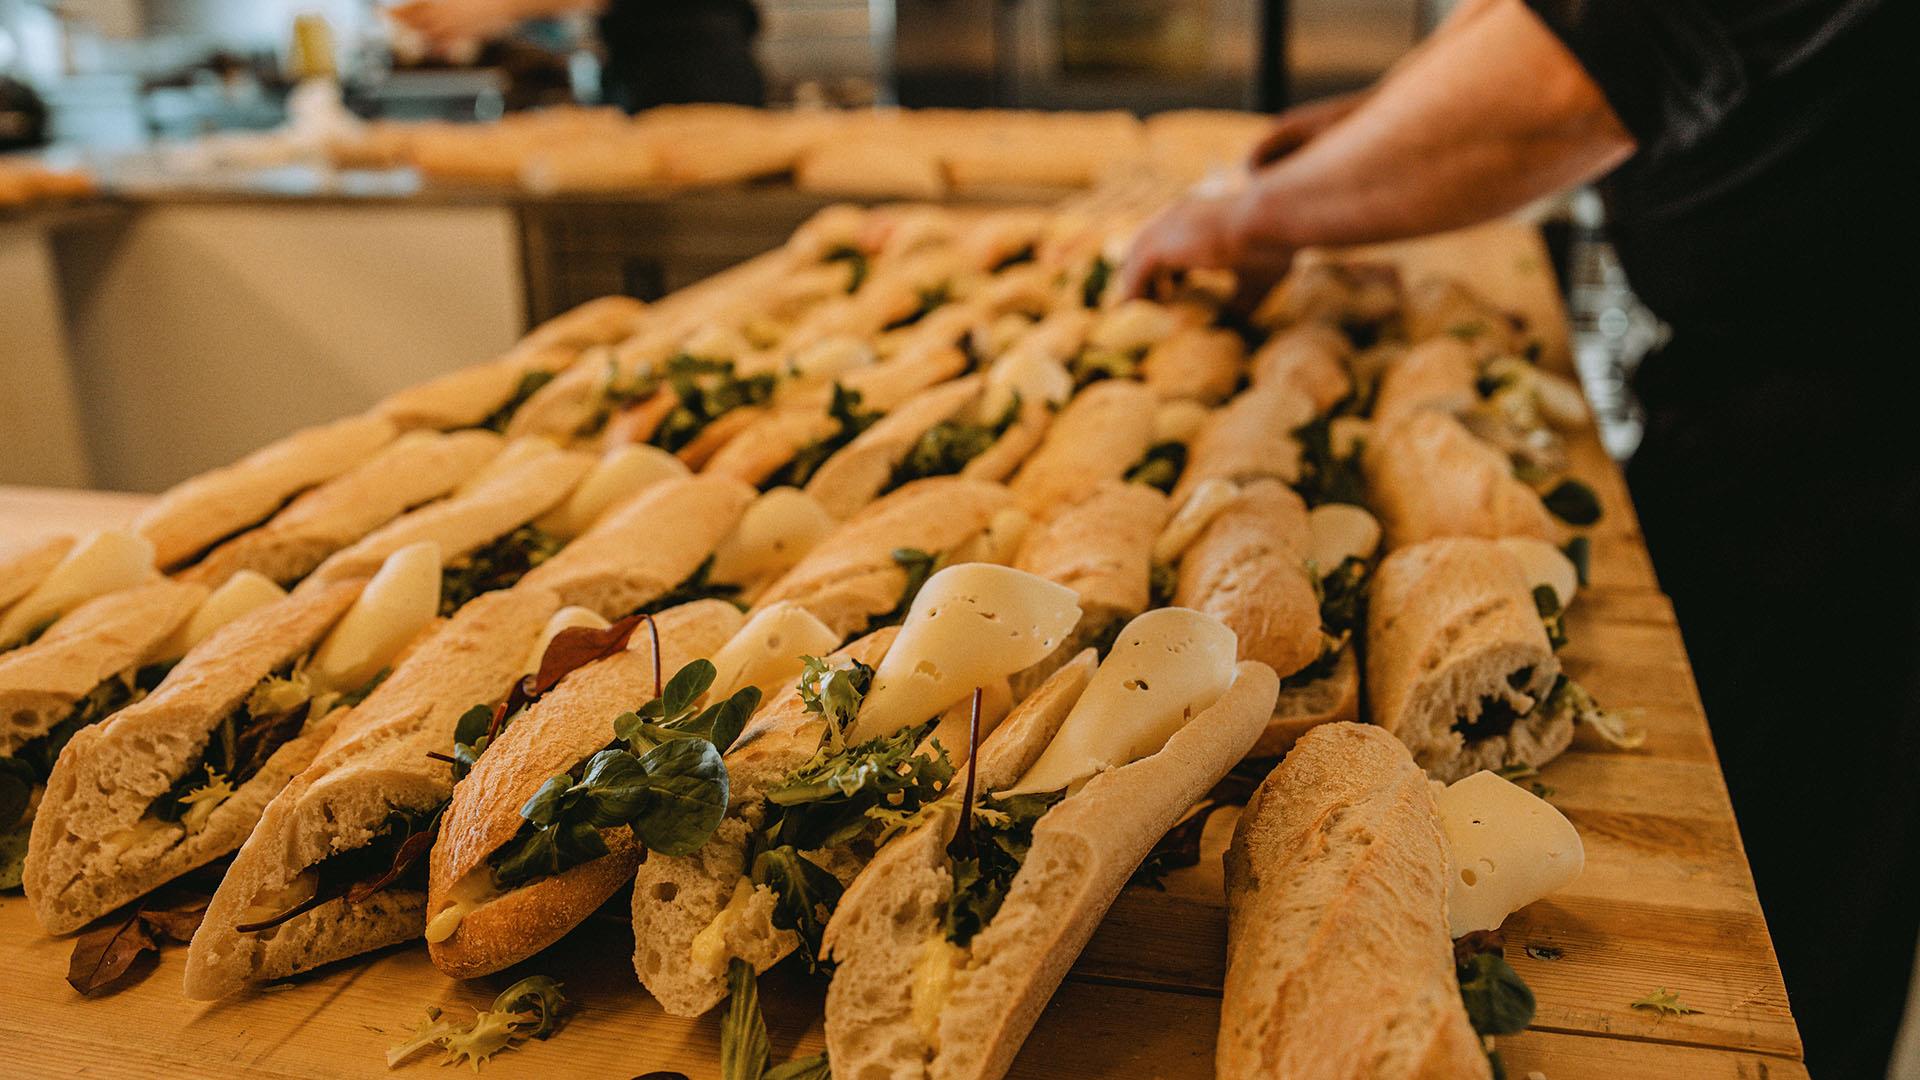 Lots of baguettes are being prepared for a large number of people.